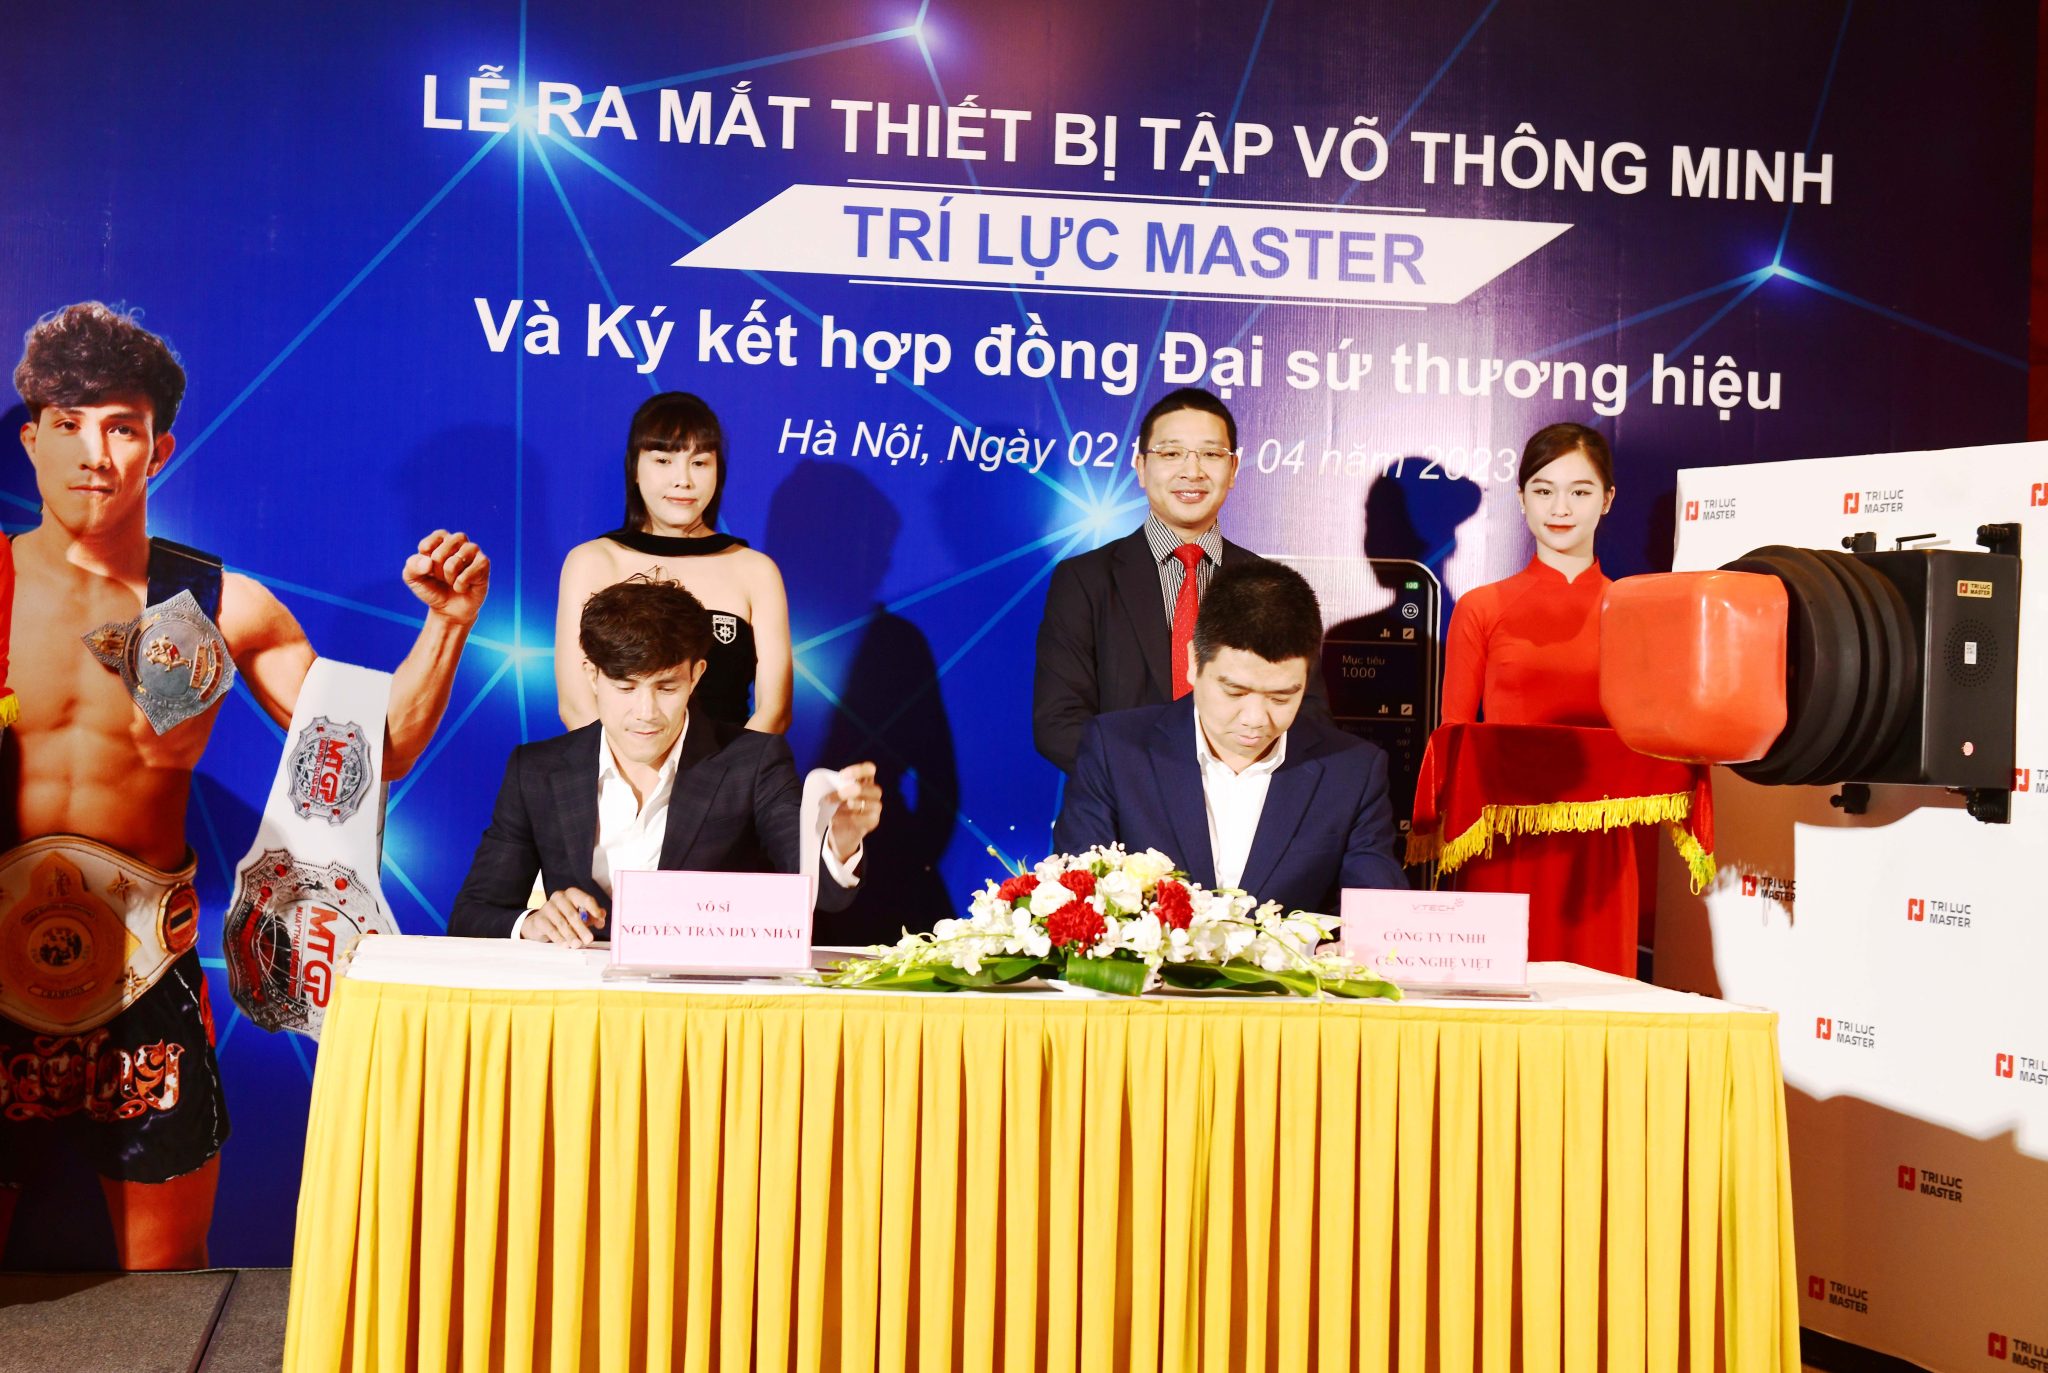 Viet Technology Company launched Tri Luc Master smart martial arts training machine and signed a Brand Ambassador contract with Boxer Nguyen Tran Duy Nhat